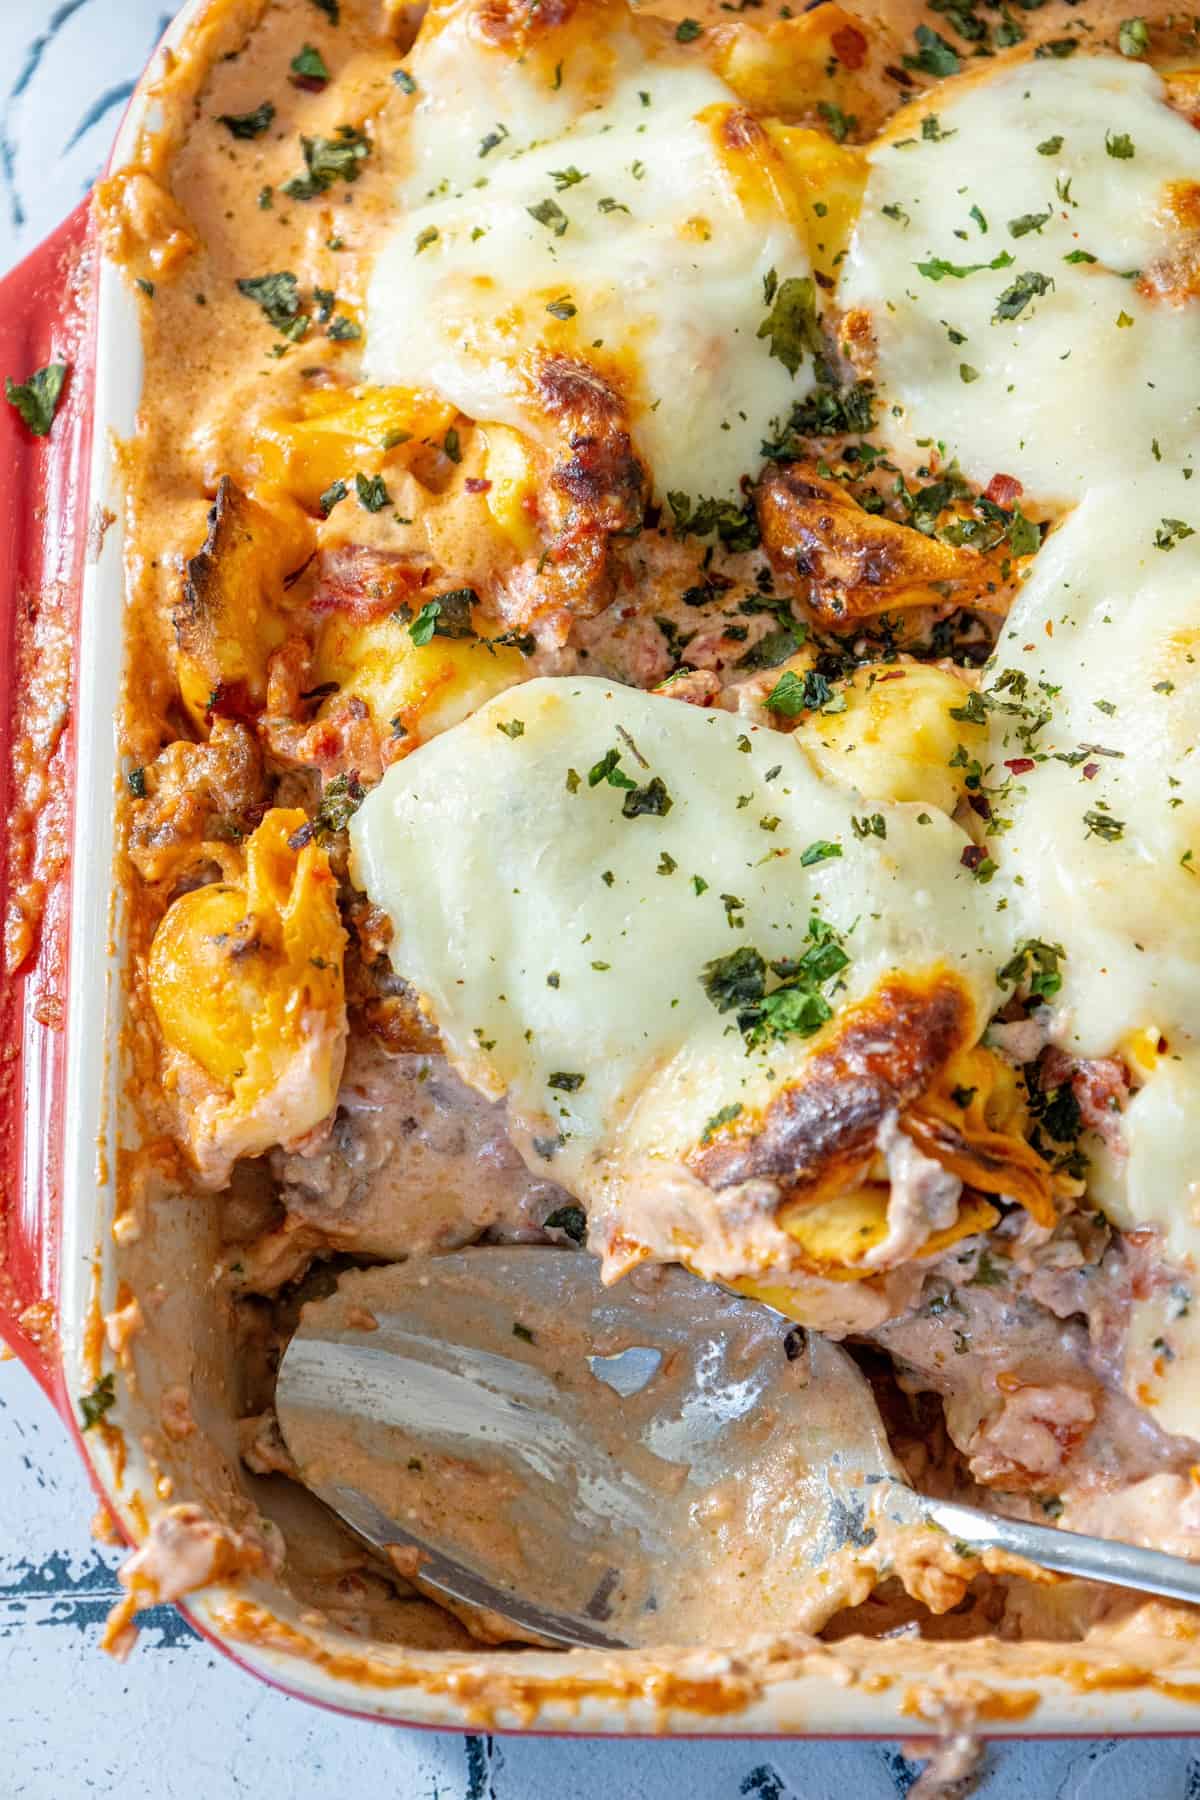 A cheesy casserole bake with tortellini and tomatoes.